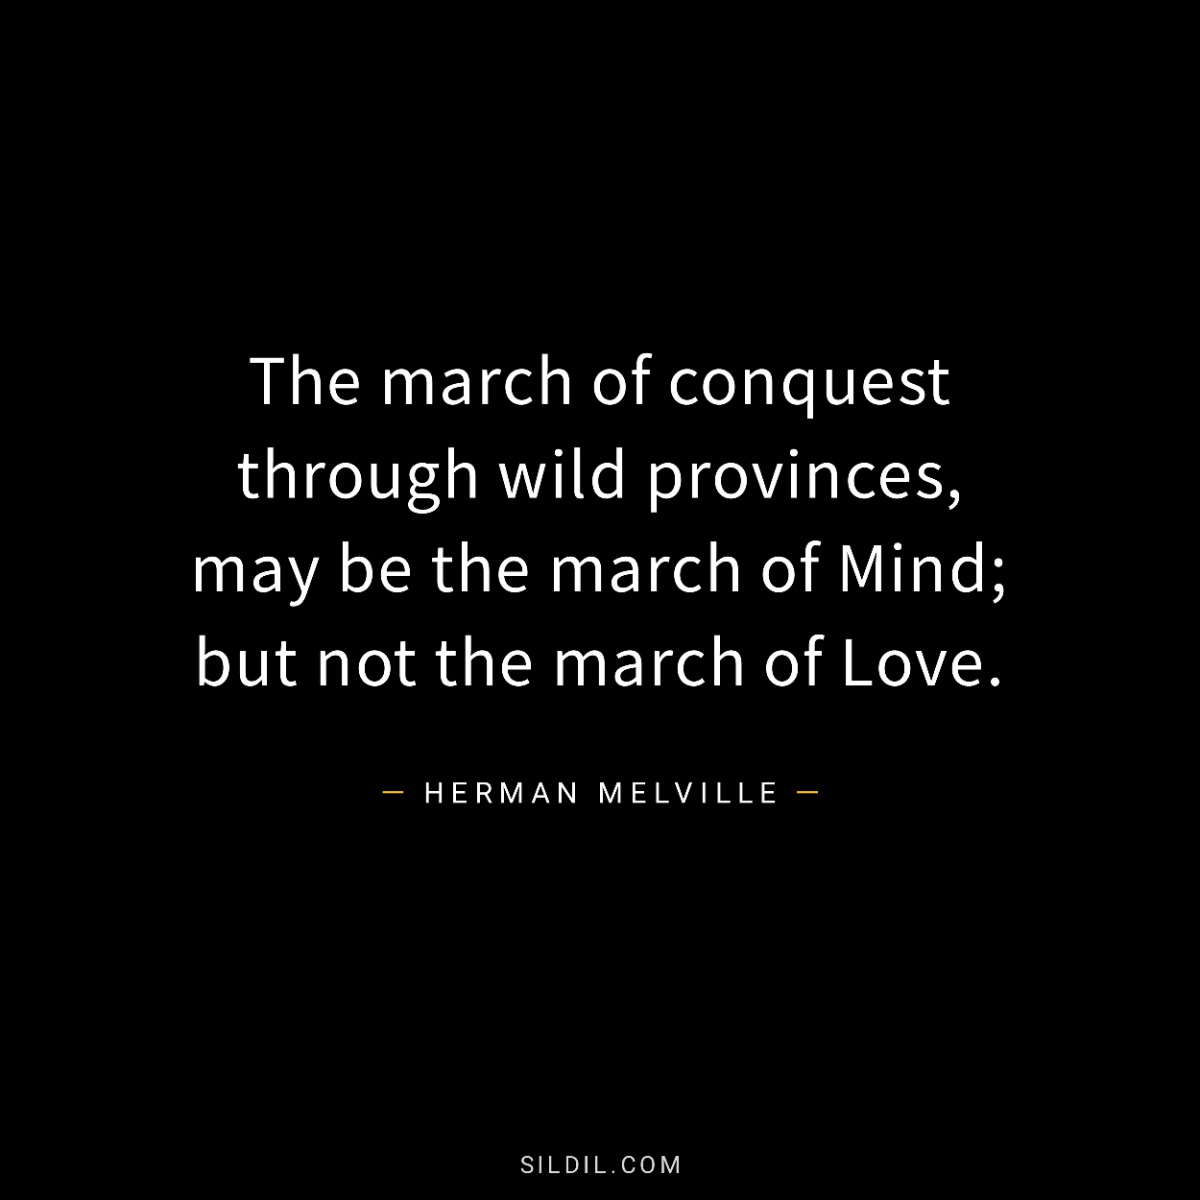 The march of conquest through wild provinces, may be the march of Mind; but not the march of Love.